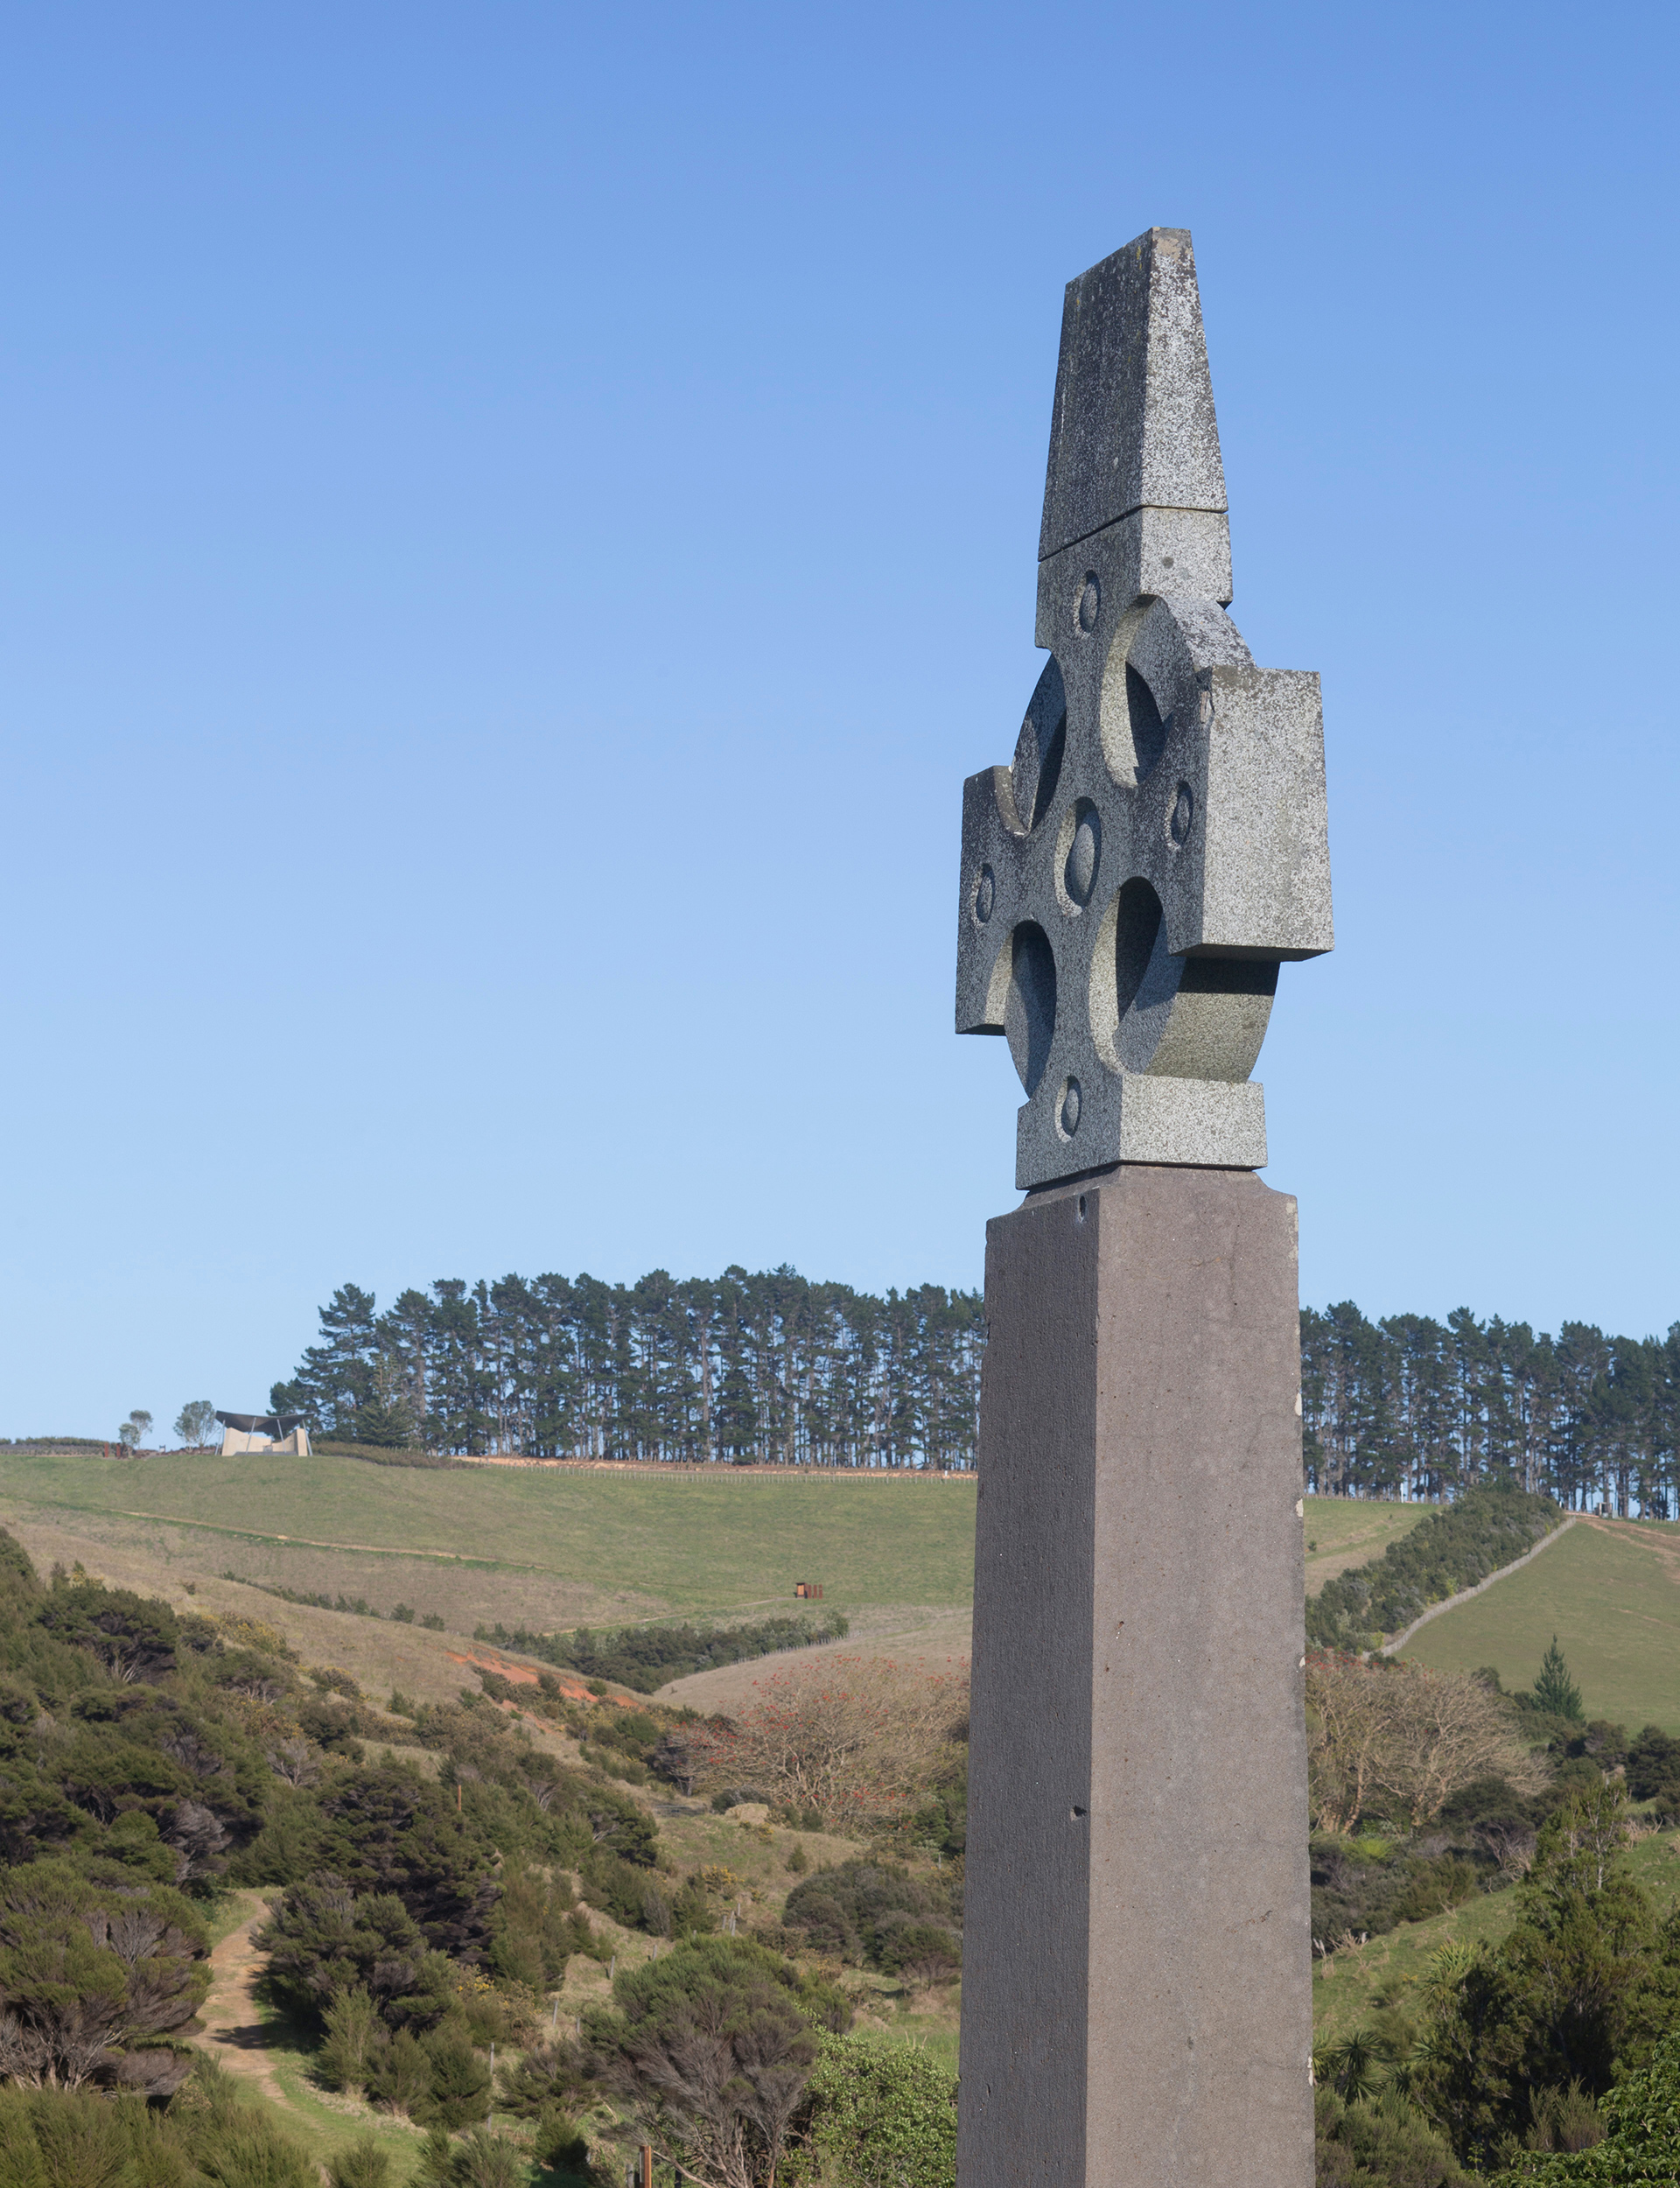 The Celtic Marsden Cross, erected in 1907, marks the spot where the reverend Samuel Marsden preached his first sermon in New Zealand in 1814.